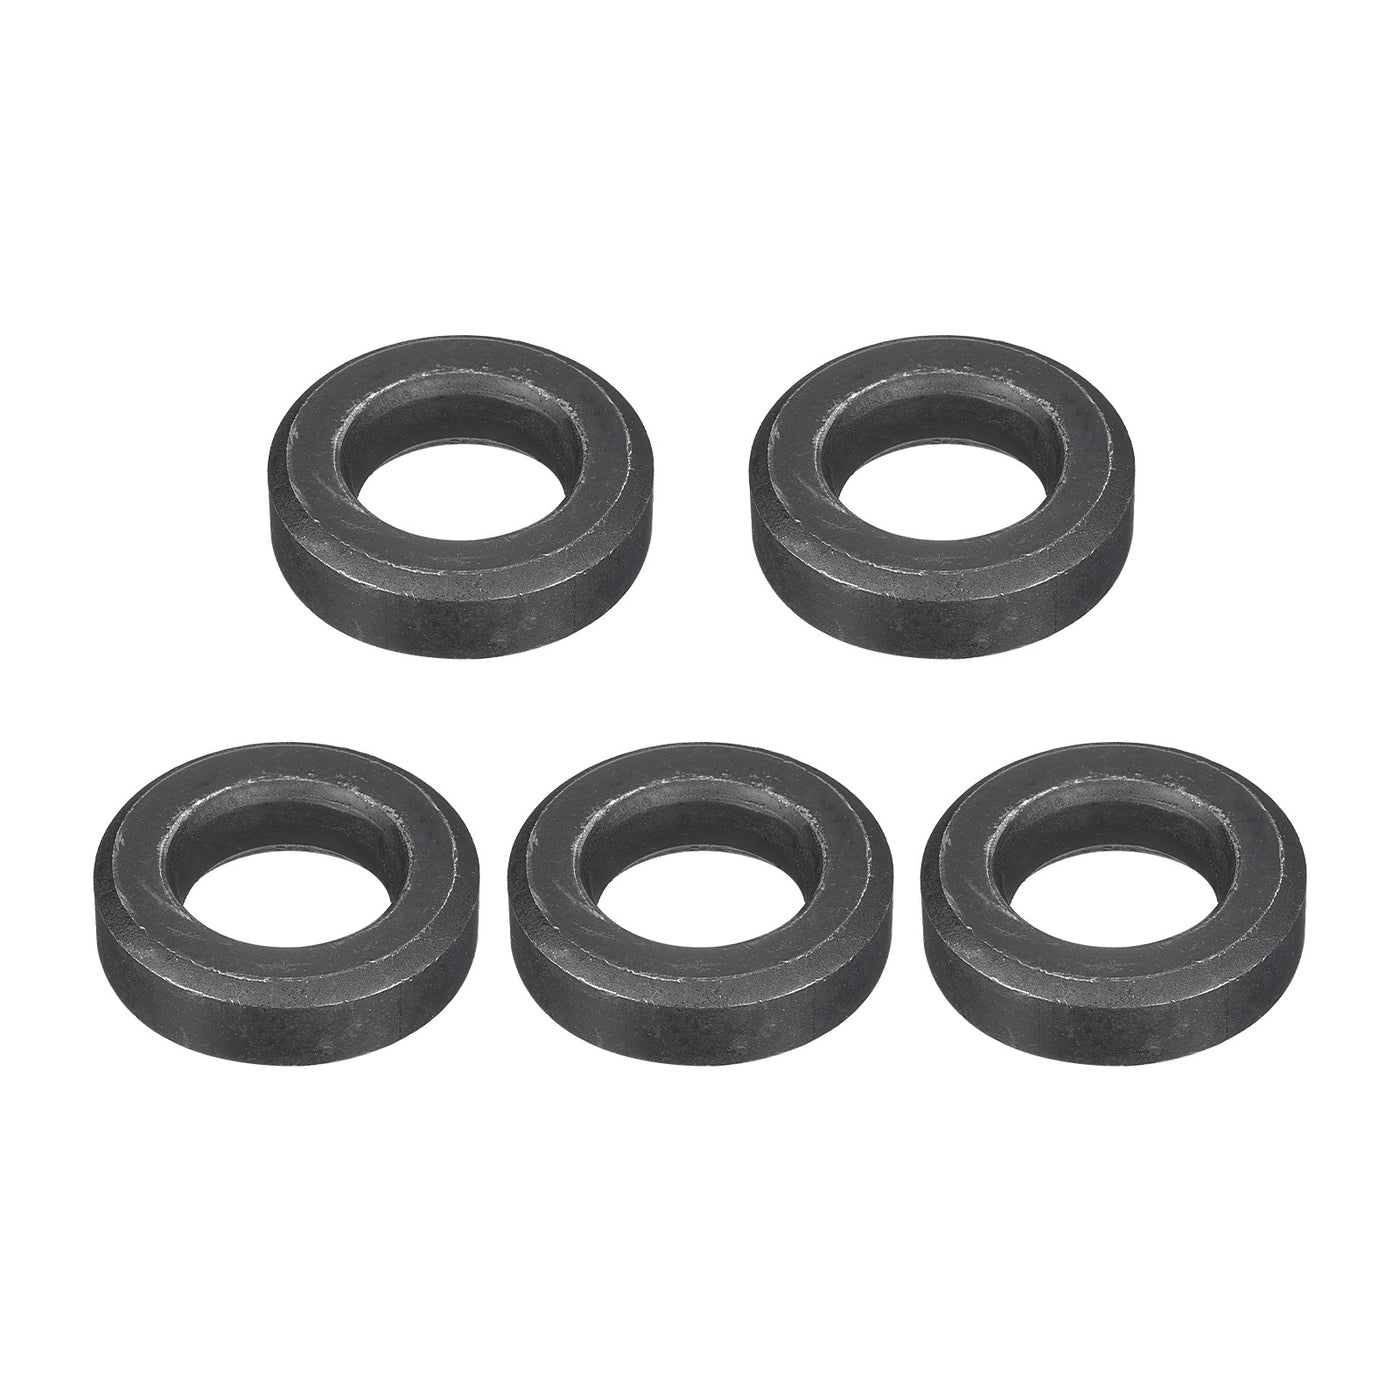 uxcell Uxcell M20 Carbon Steel Flat Washer 5pcs 21x38x10.5mm Grade 8.8 Alloy Steel Fasteners